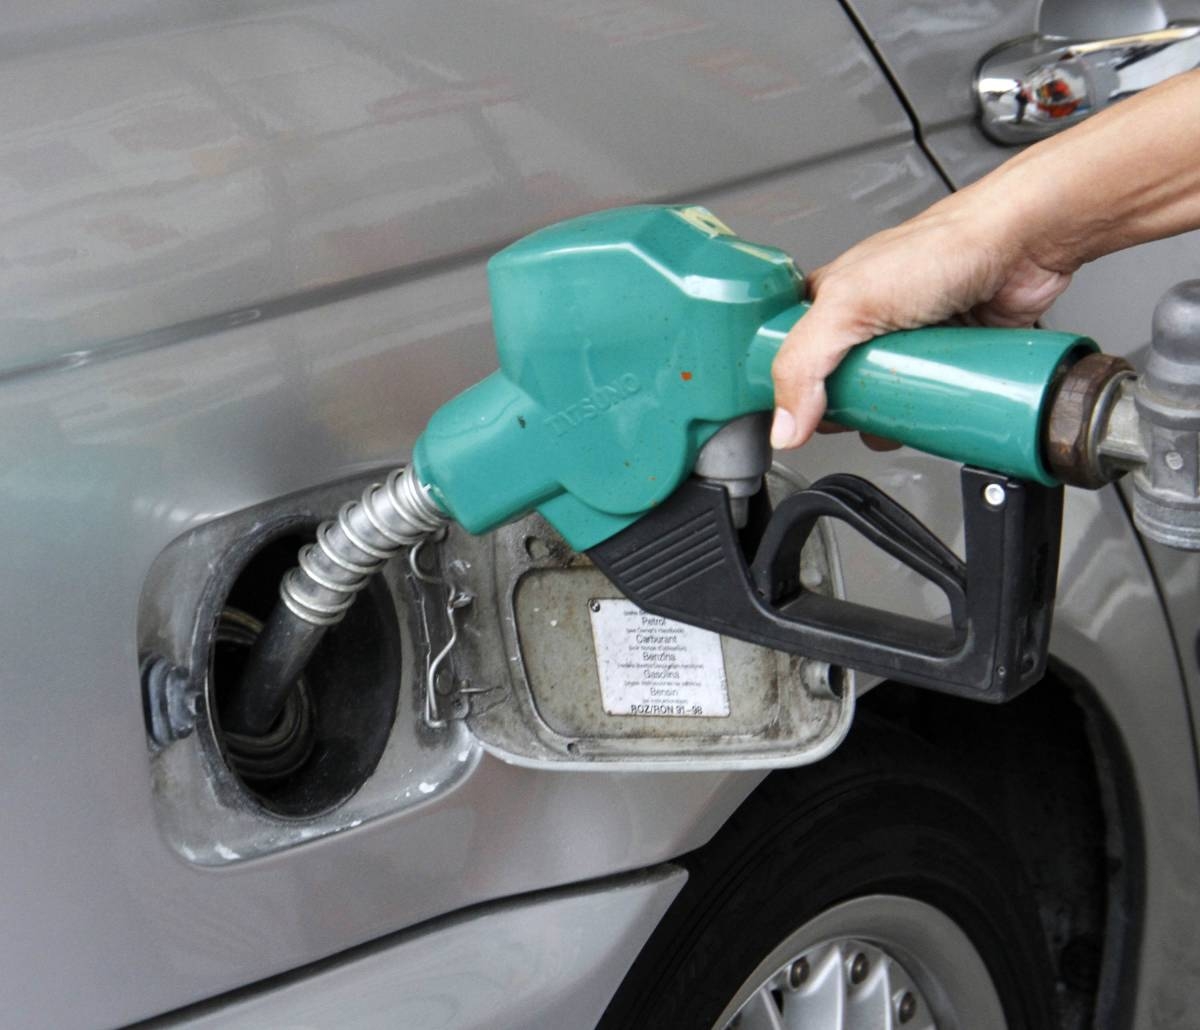 fuel prices down this week